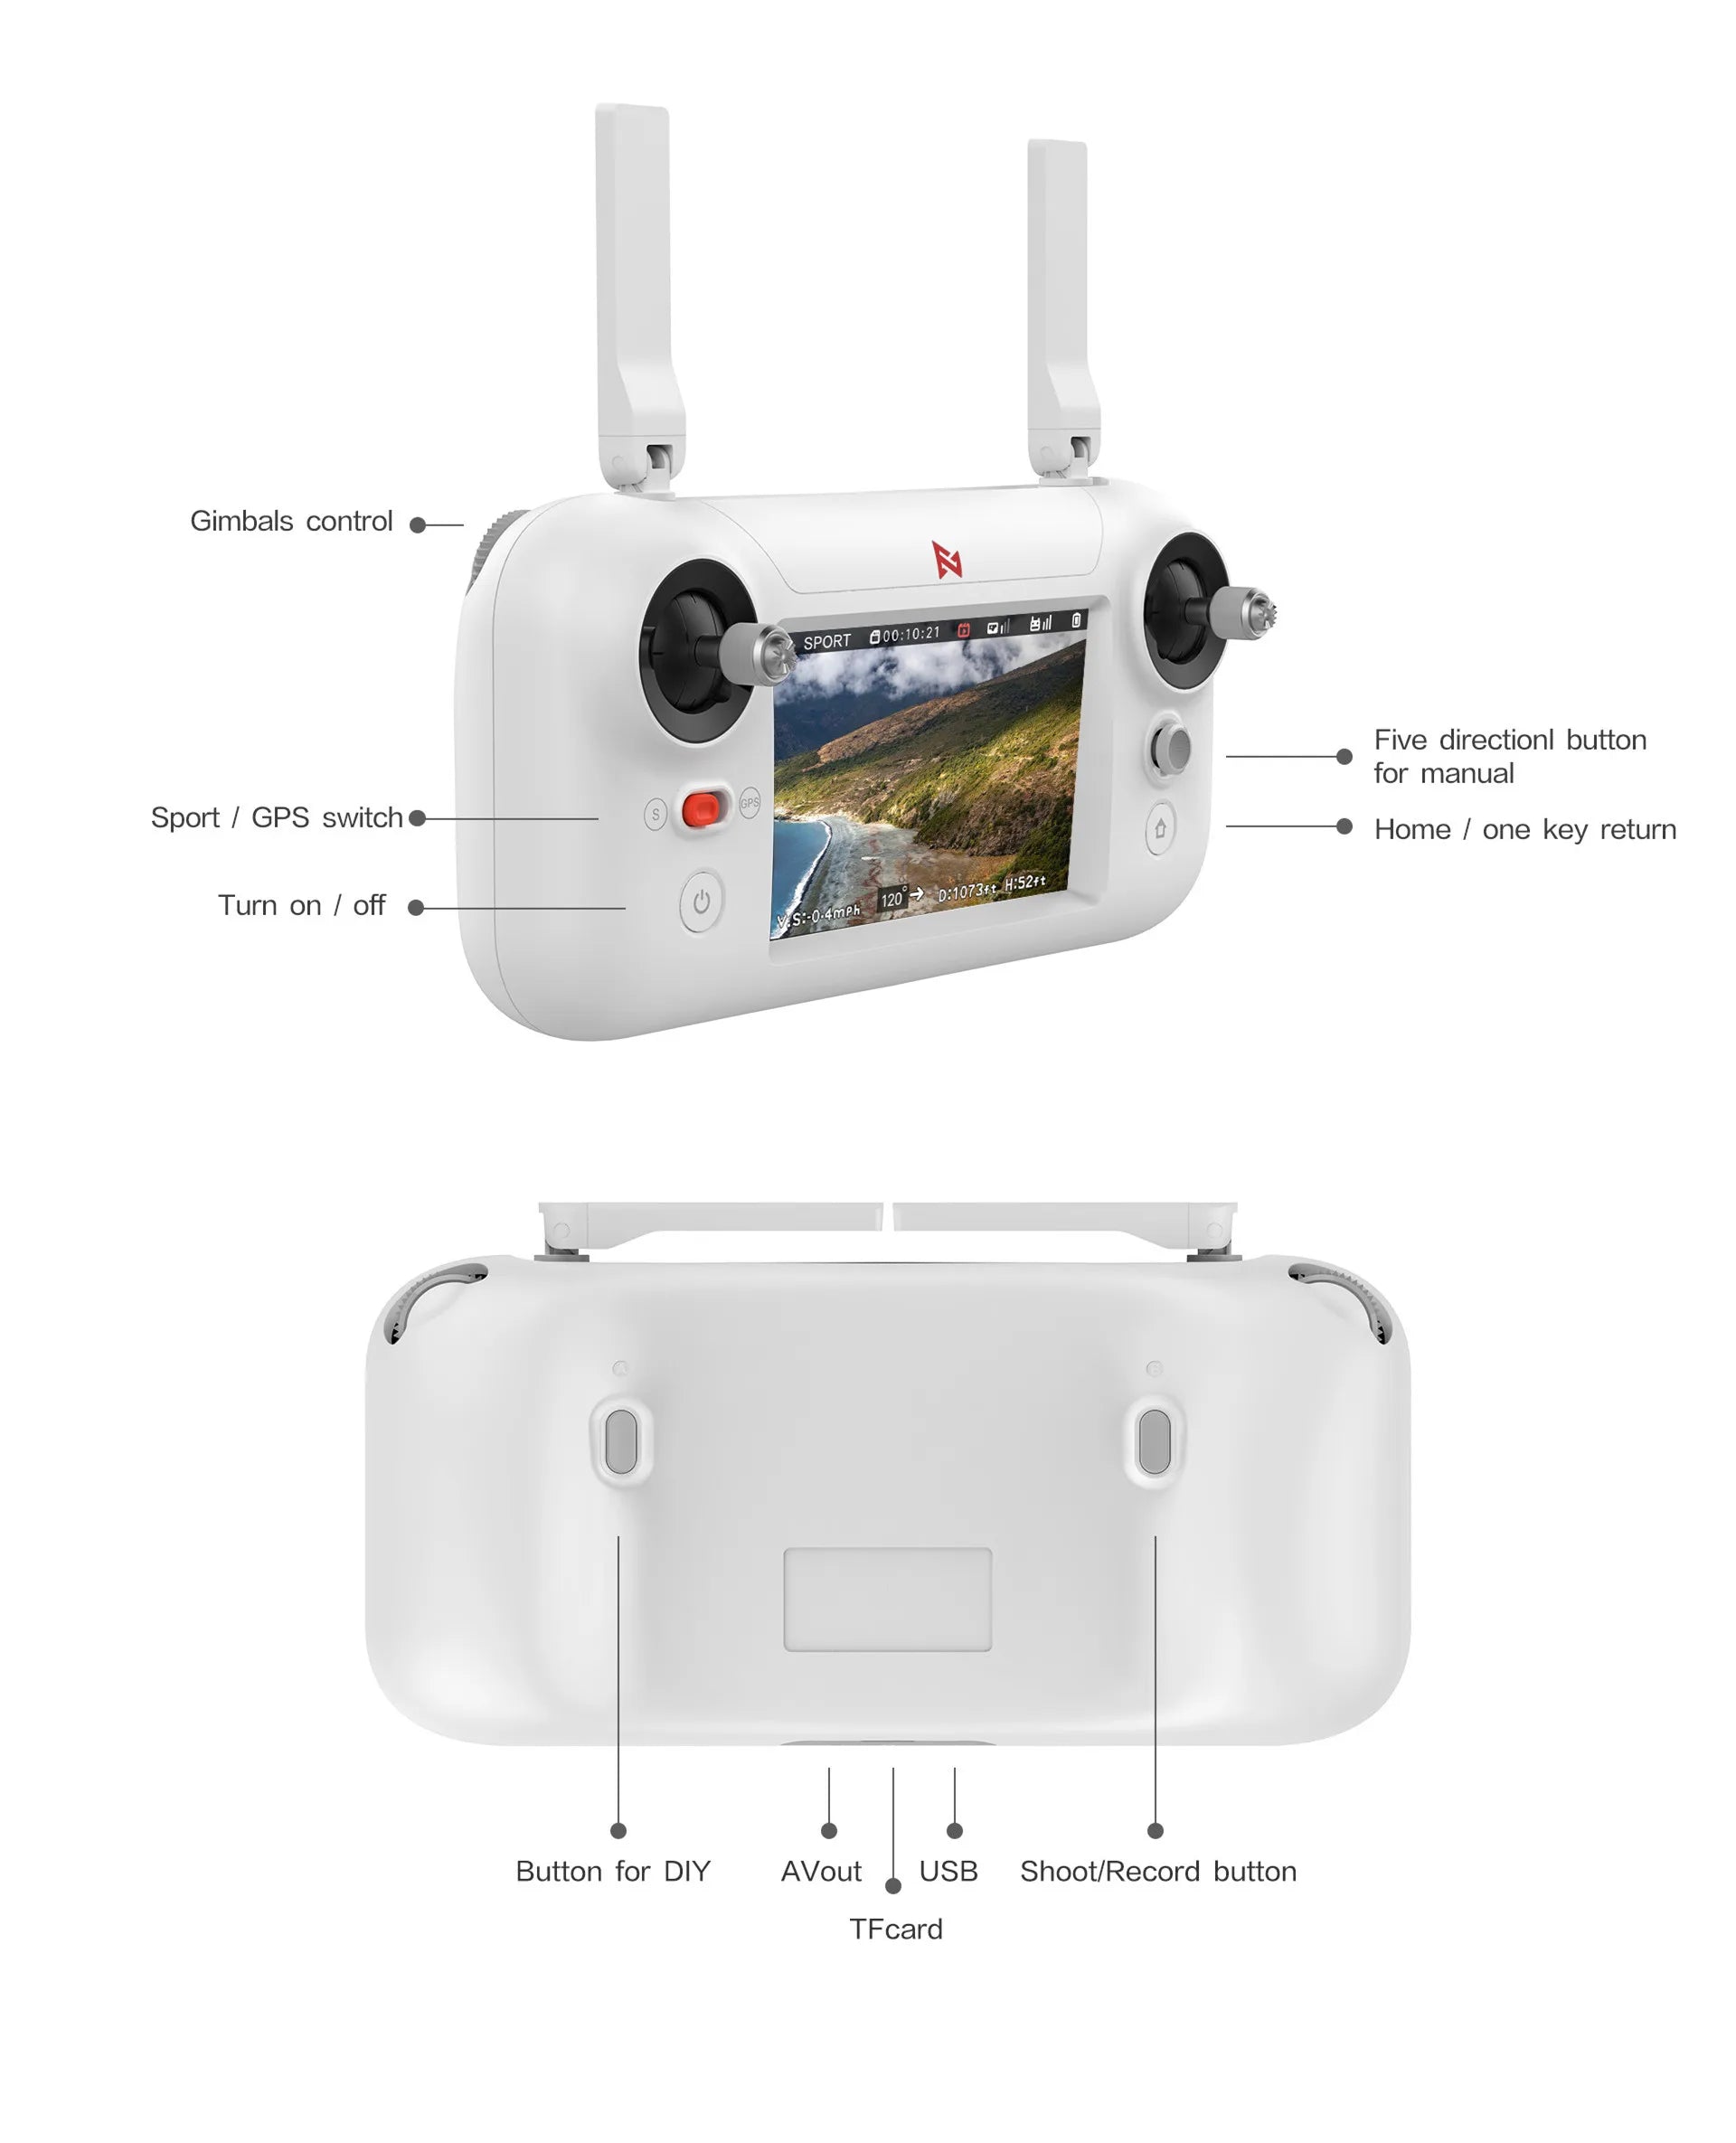 Xiaomi FIMI A3 Drone, Gimbals control 000.10.21 Qill Eul Five directionl button for manual